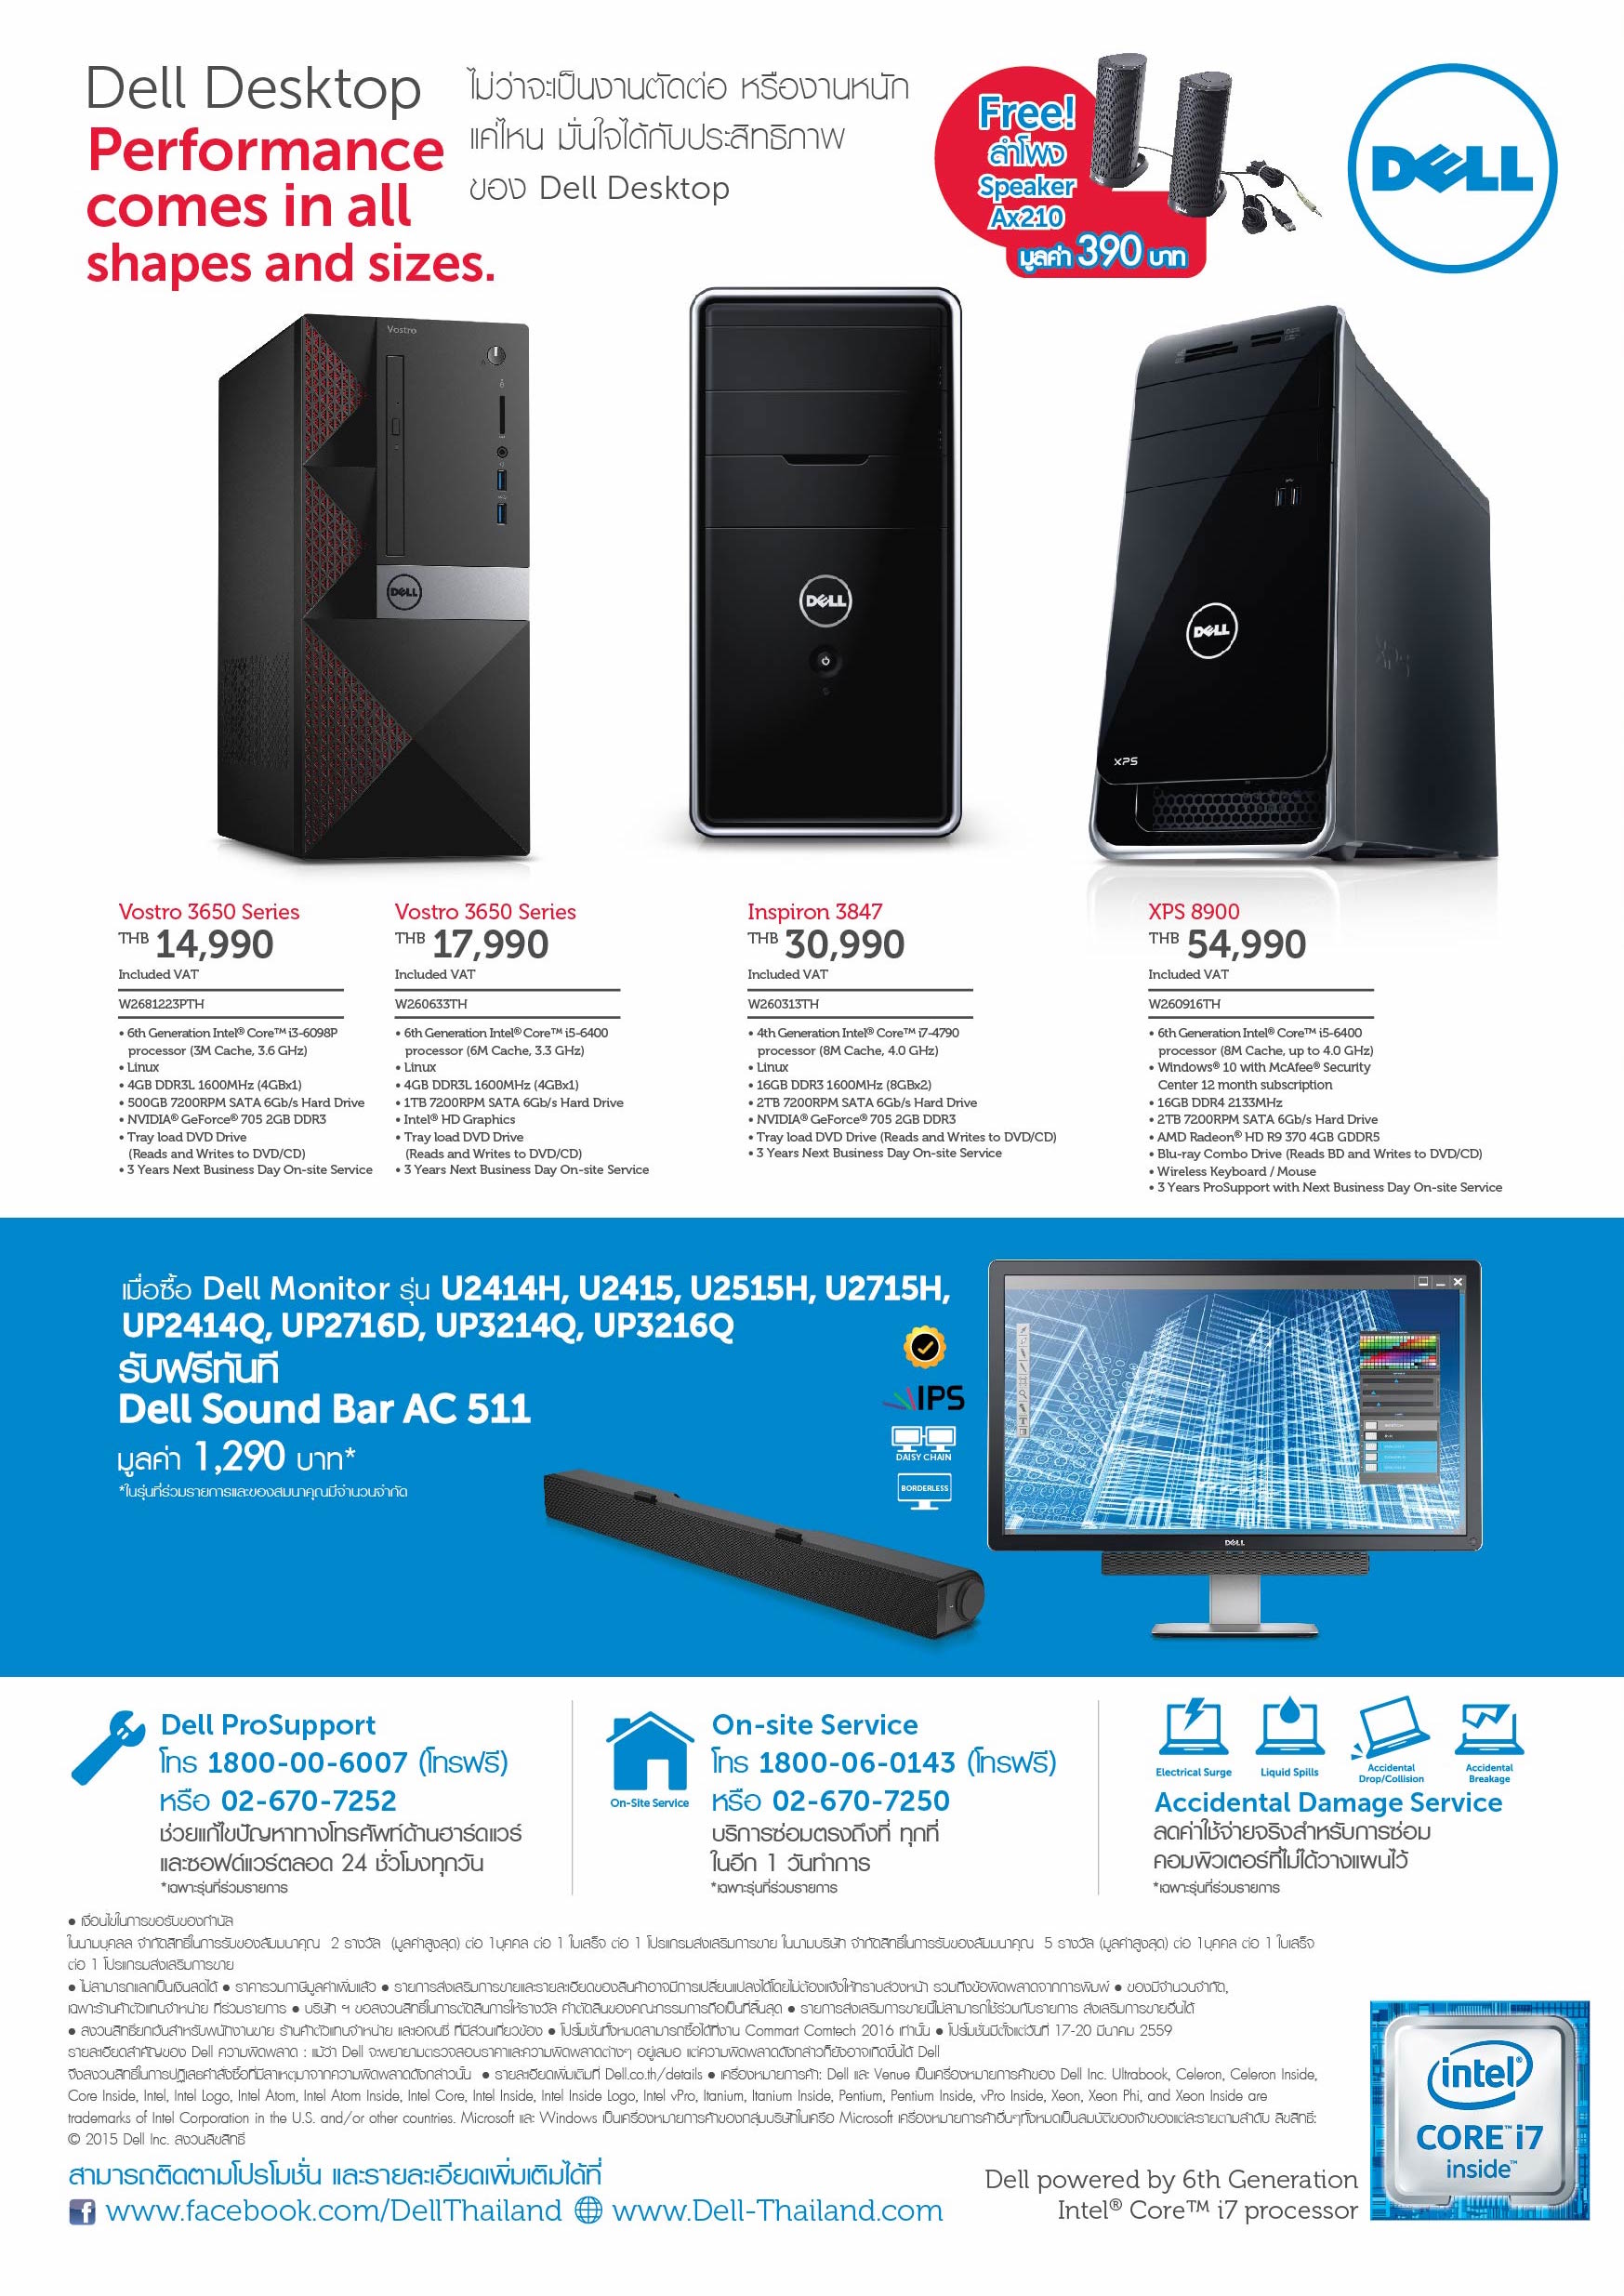 Dell Commart MAR2016 out A3 6